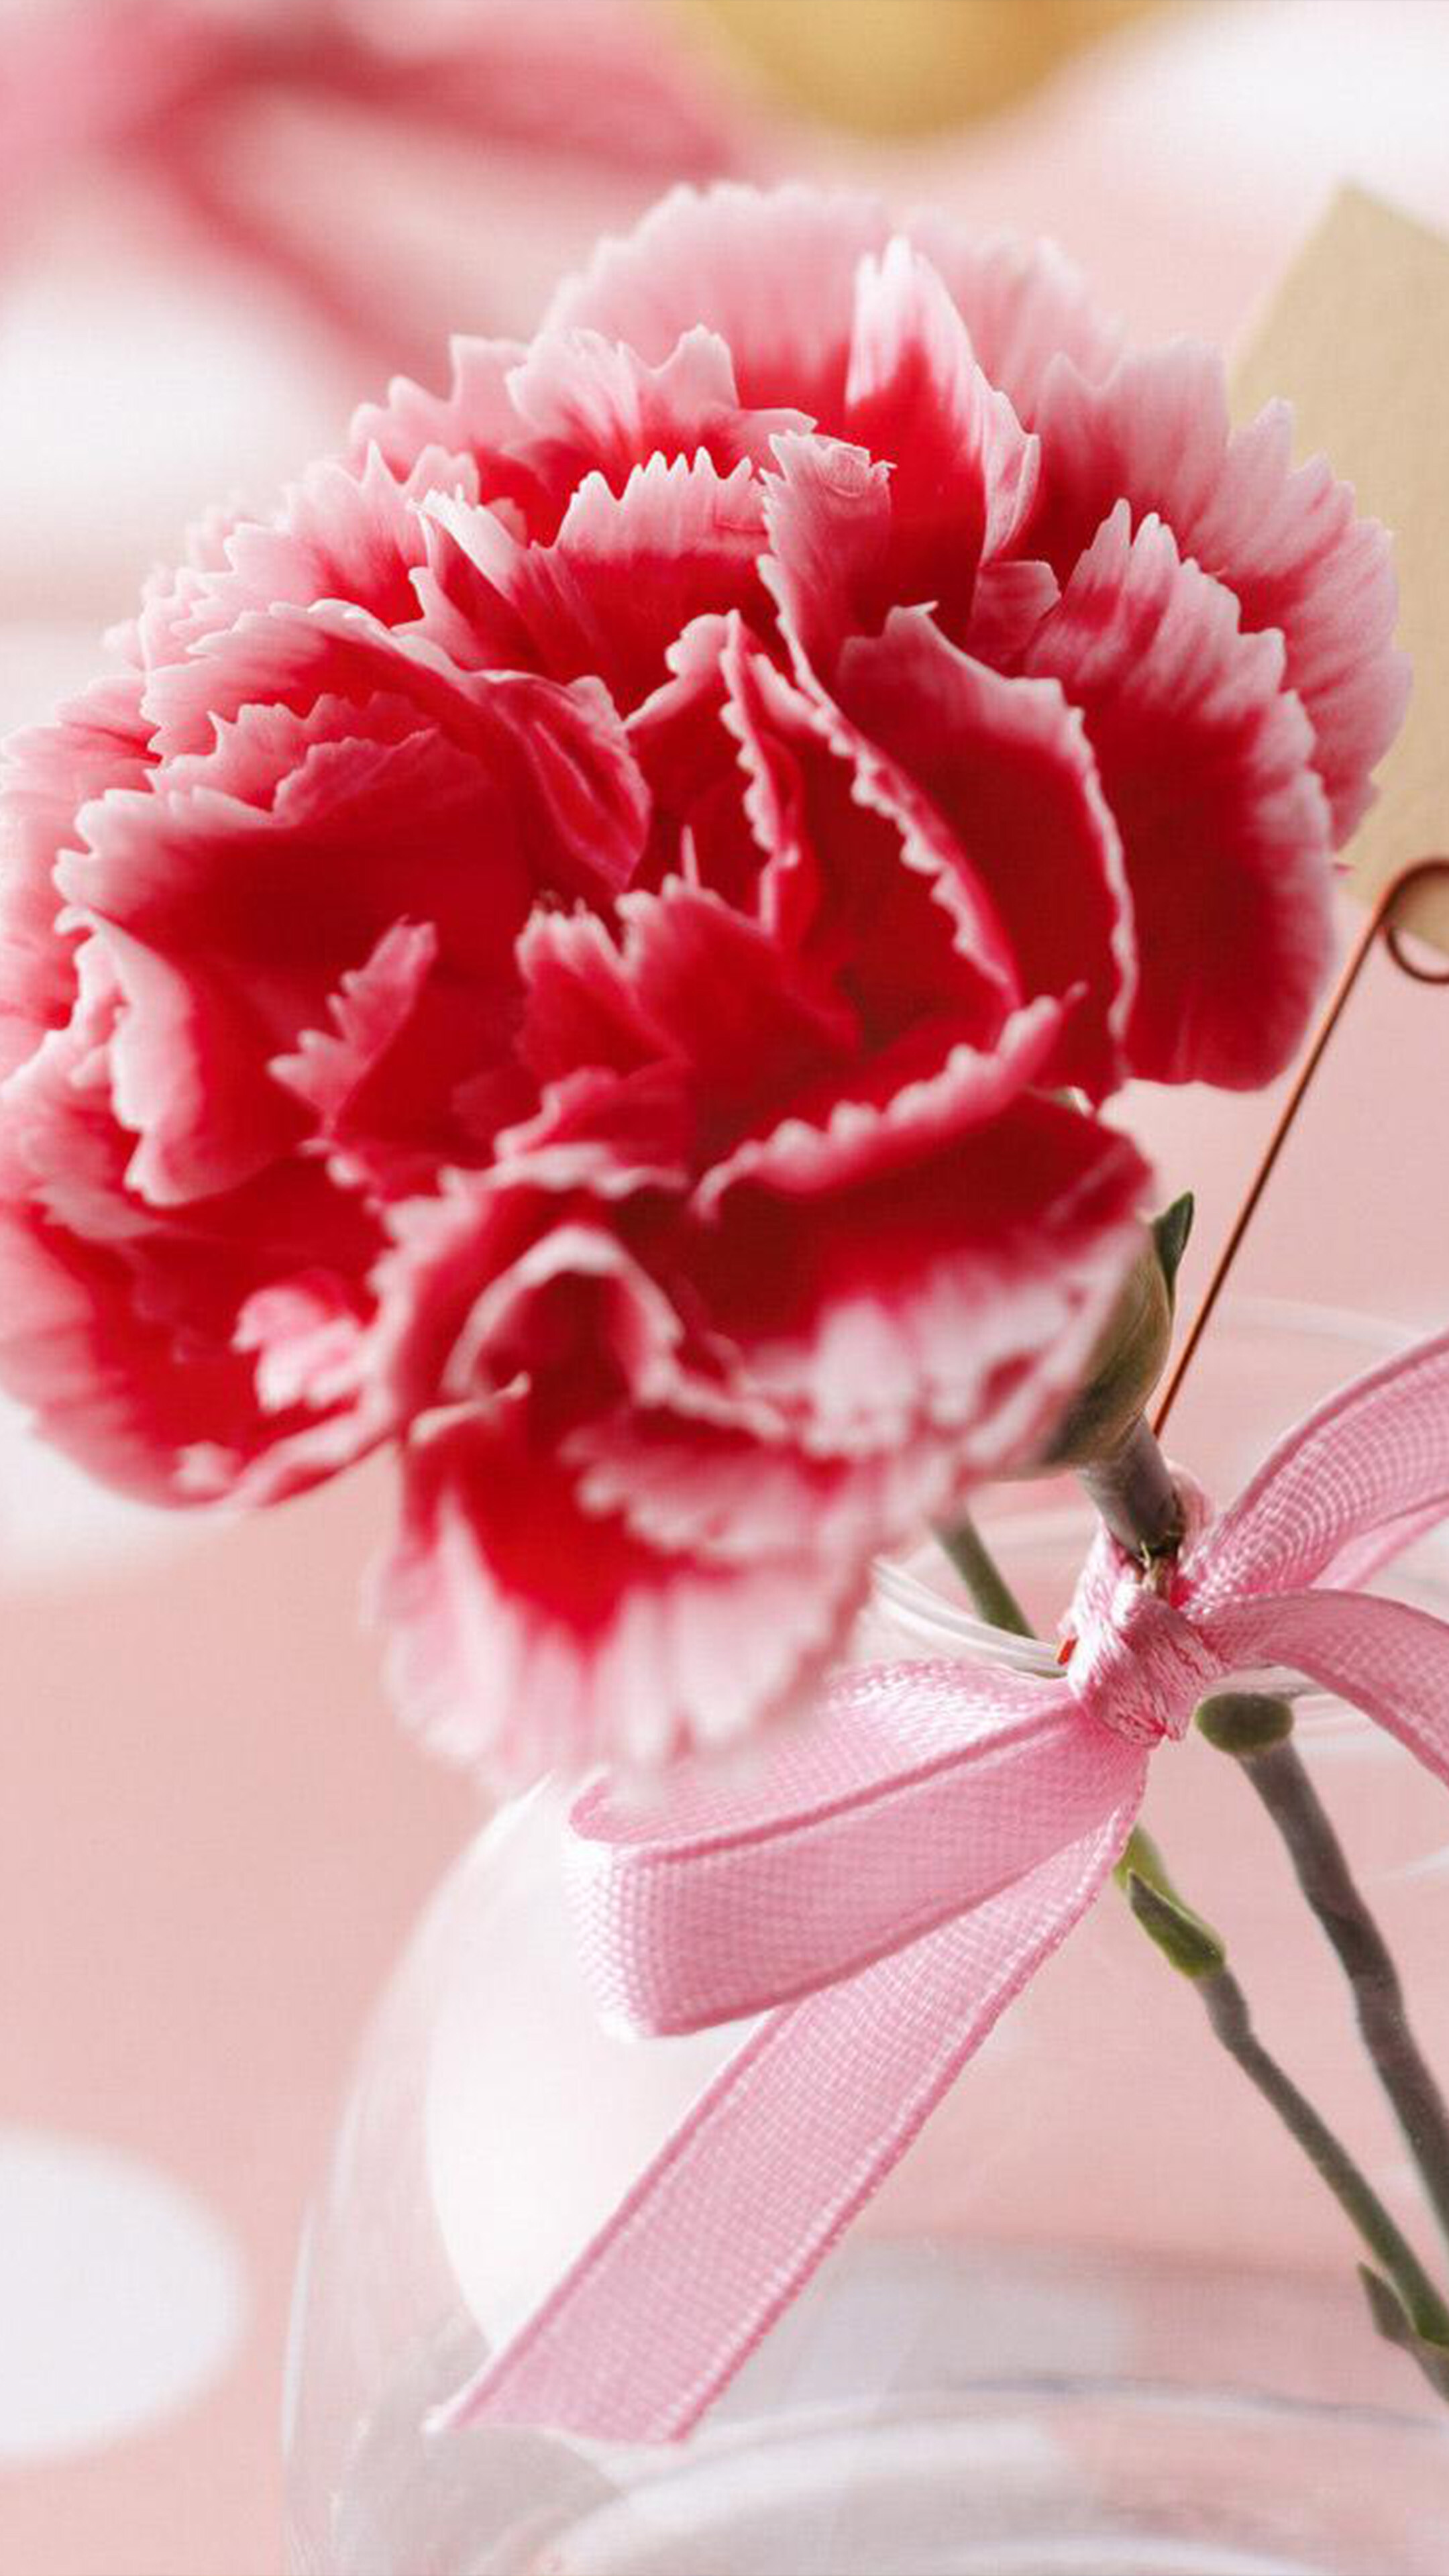 Carnation: A herbaceous perennial plant growing up to 80 cm tall, Flower, Petals. 2160x3840 4K Wallpaper.